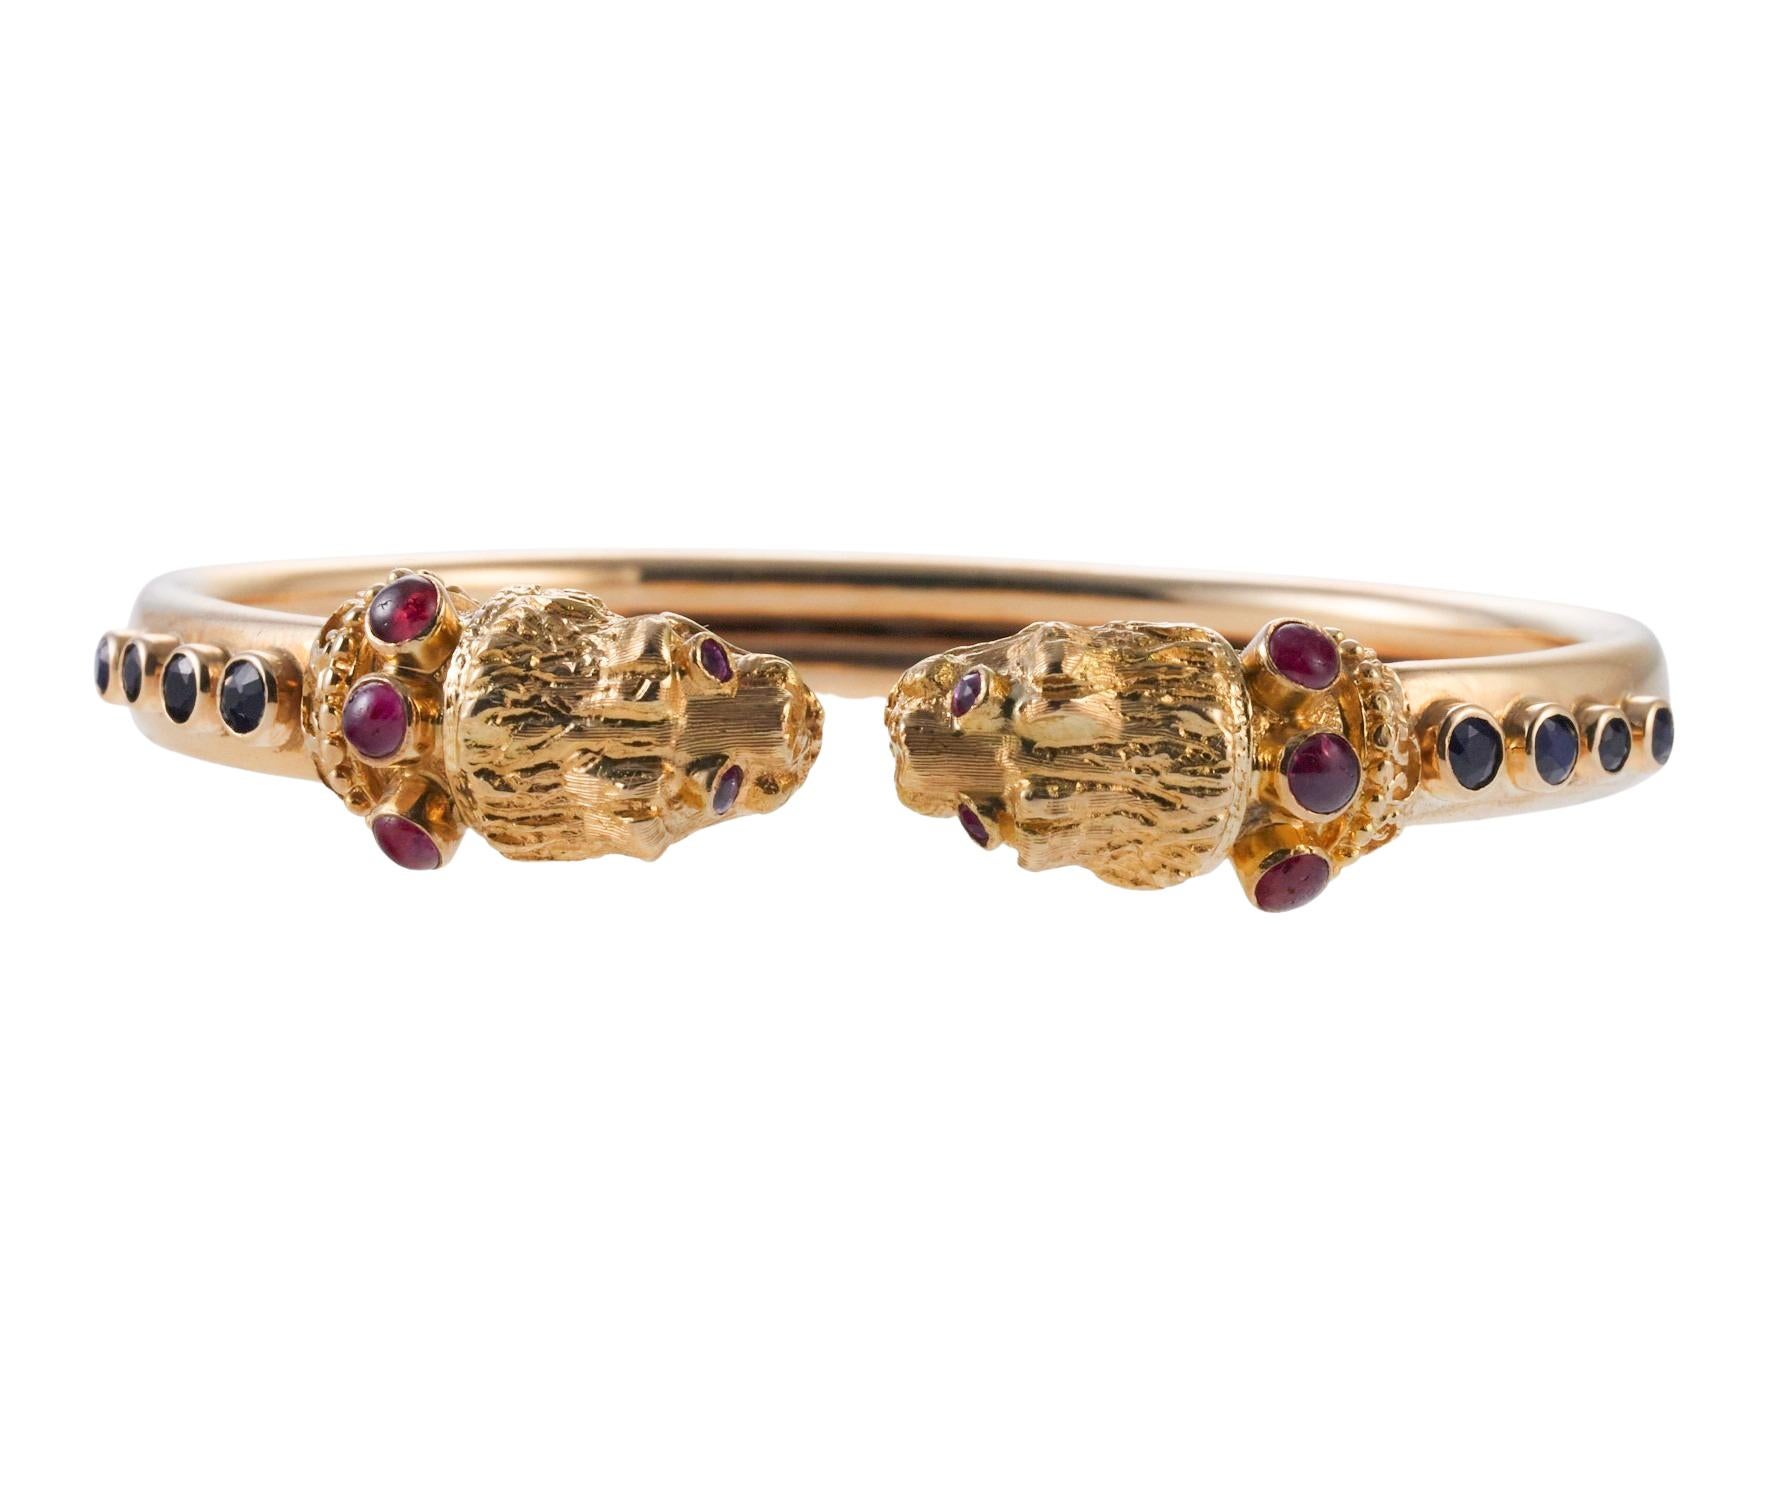 Lalaounis Greece, 18k gold Chimera Bangla bracelet, set withcabochon rubies and sapphire eyes. Bracelet will fit an approx. 7